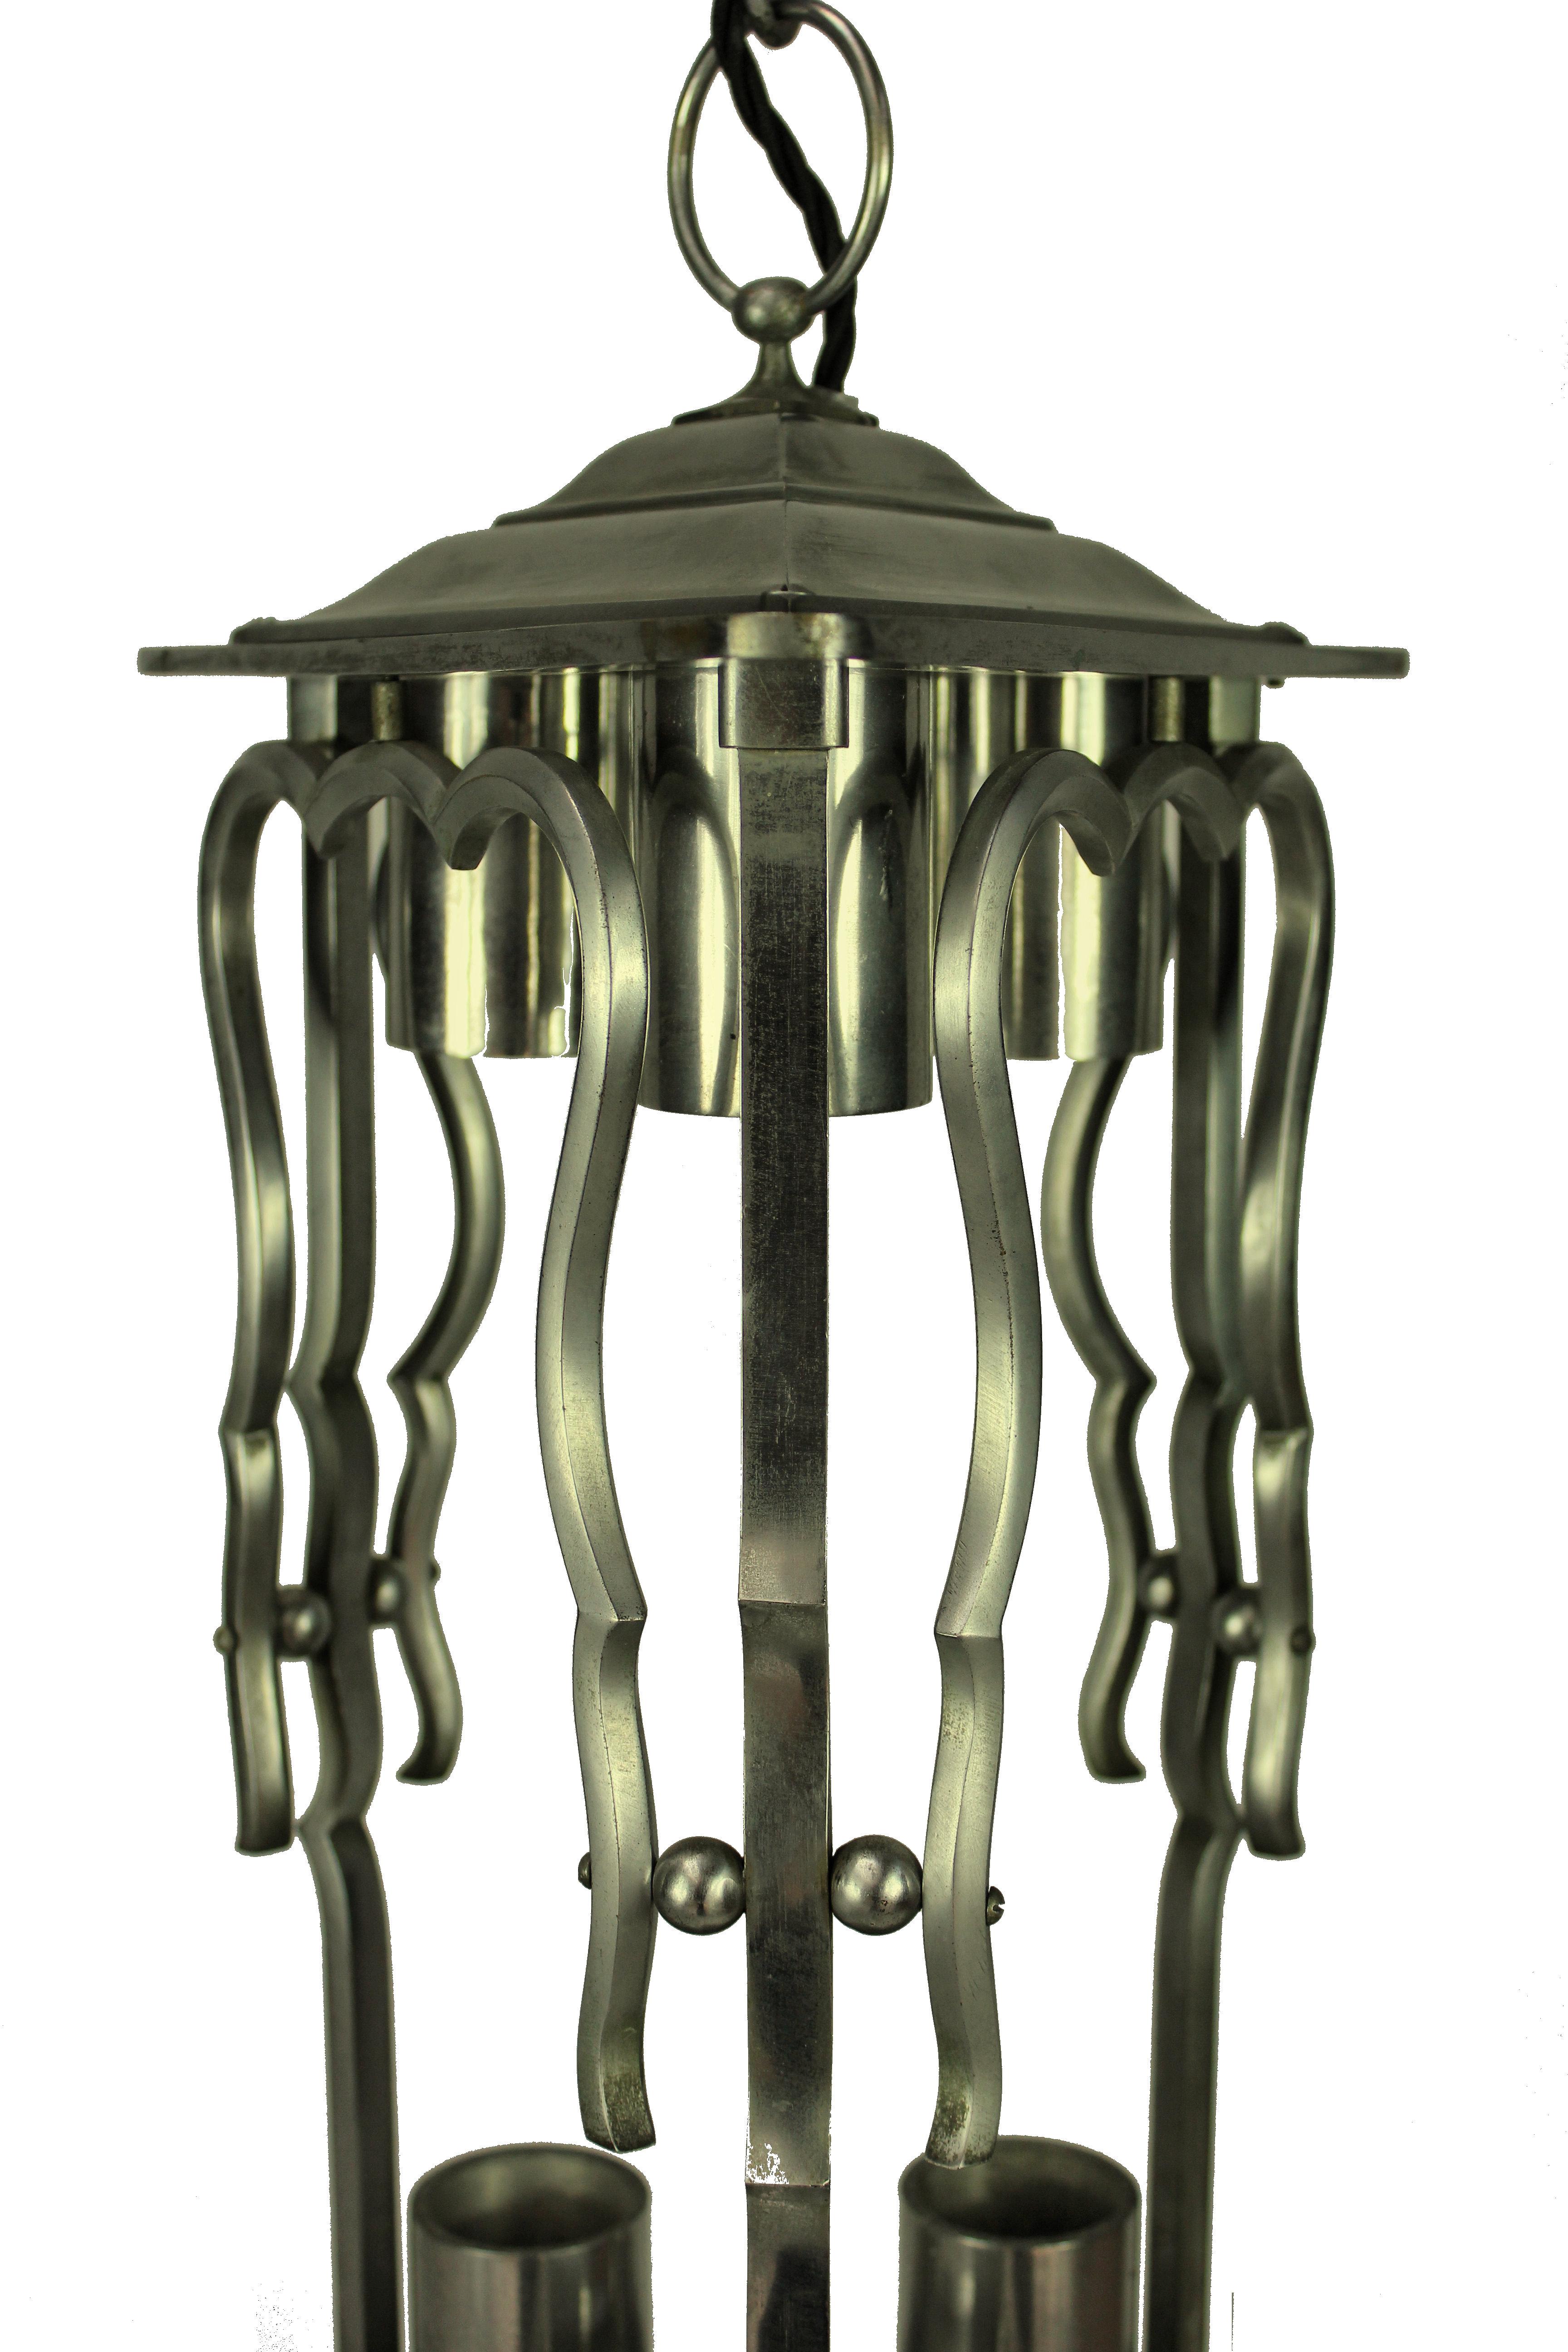 A French lantern in polished steel. Triangular in form with provision for three-light above.